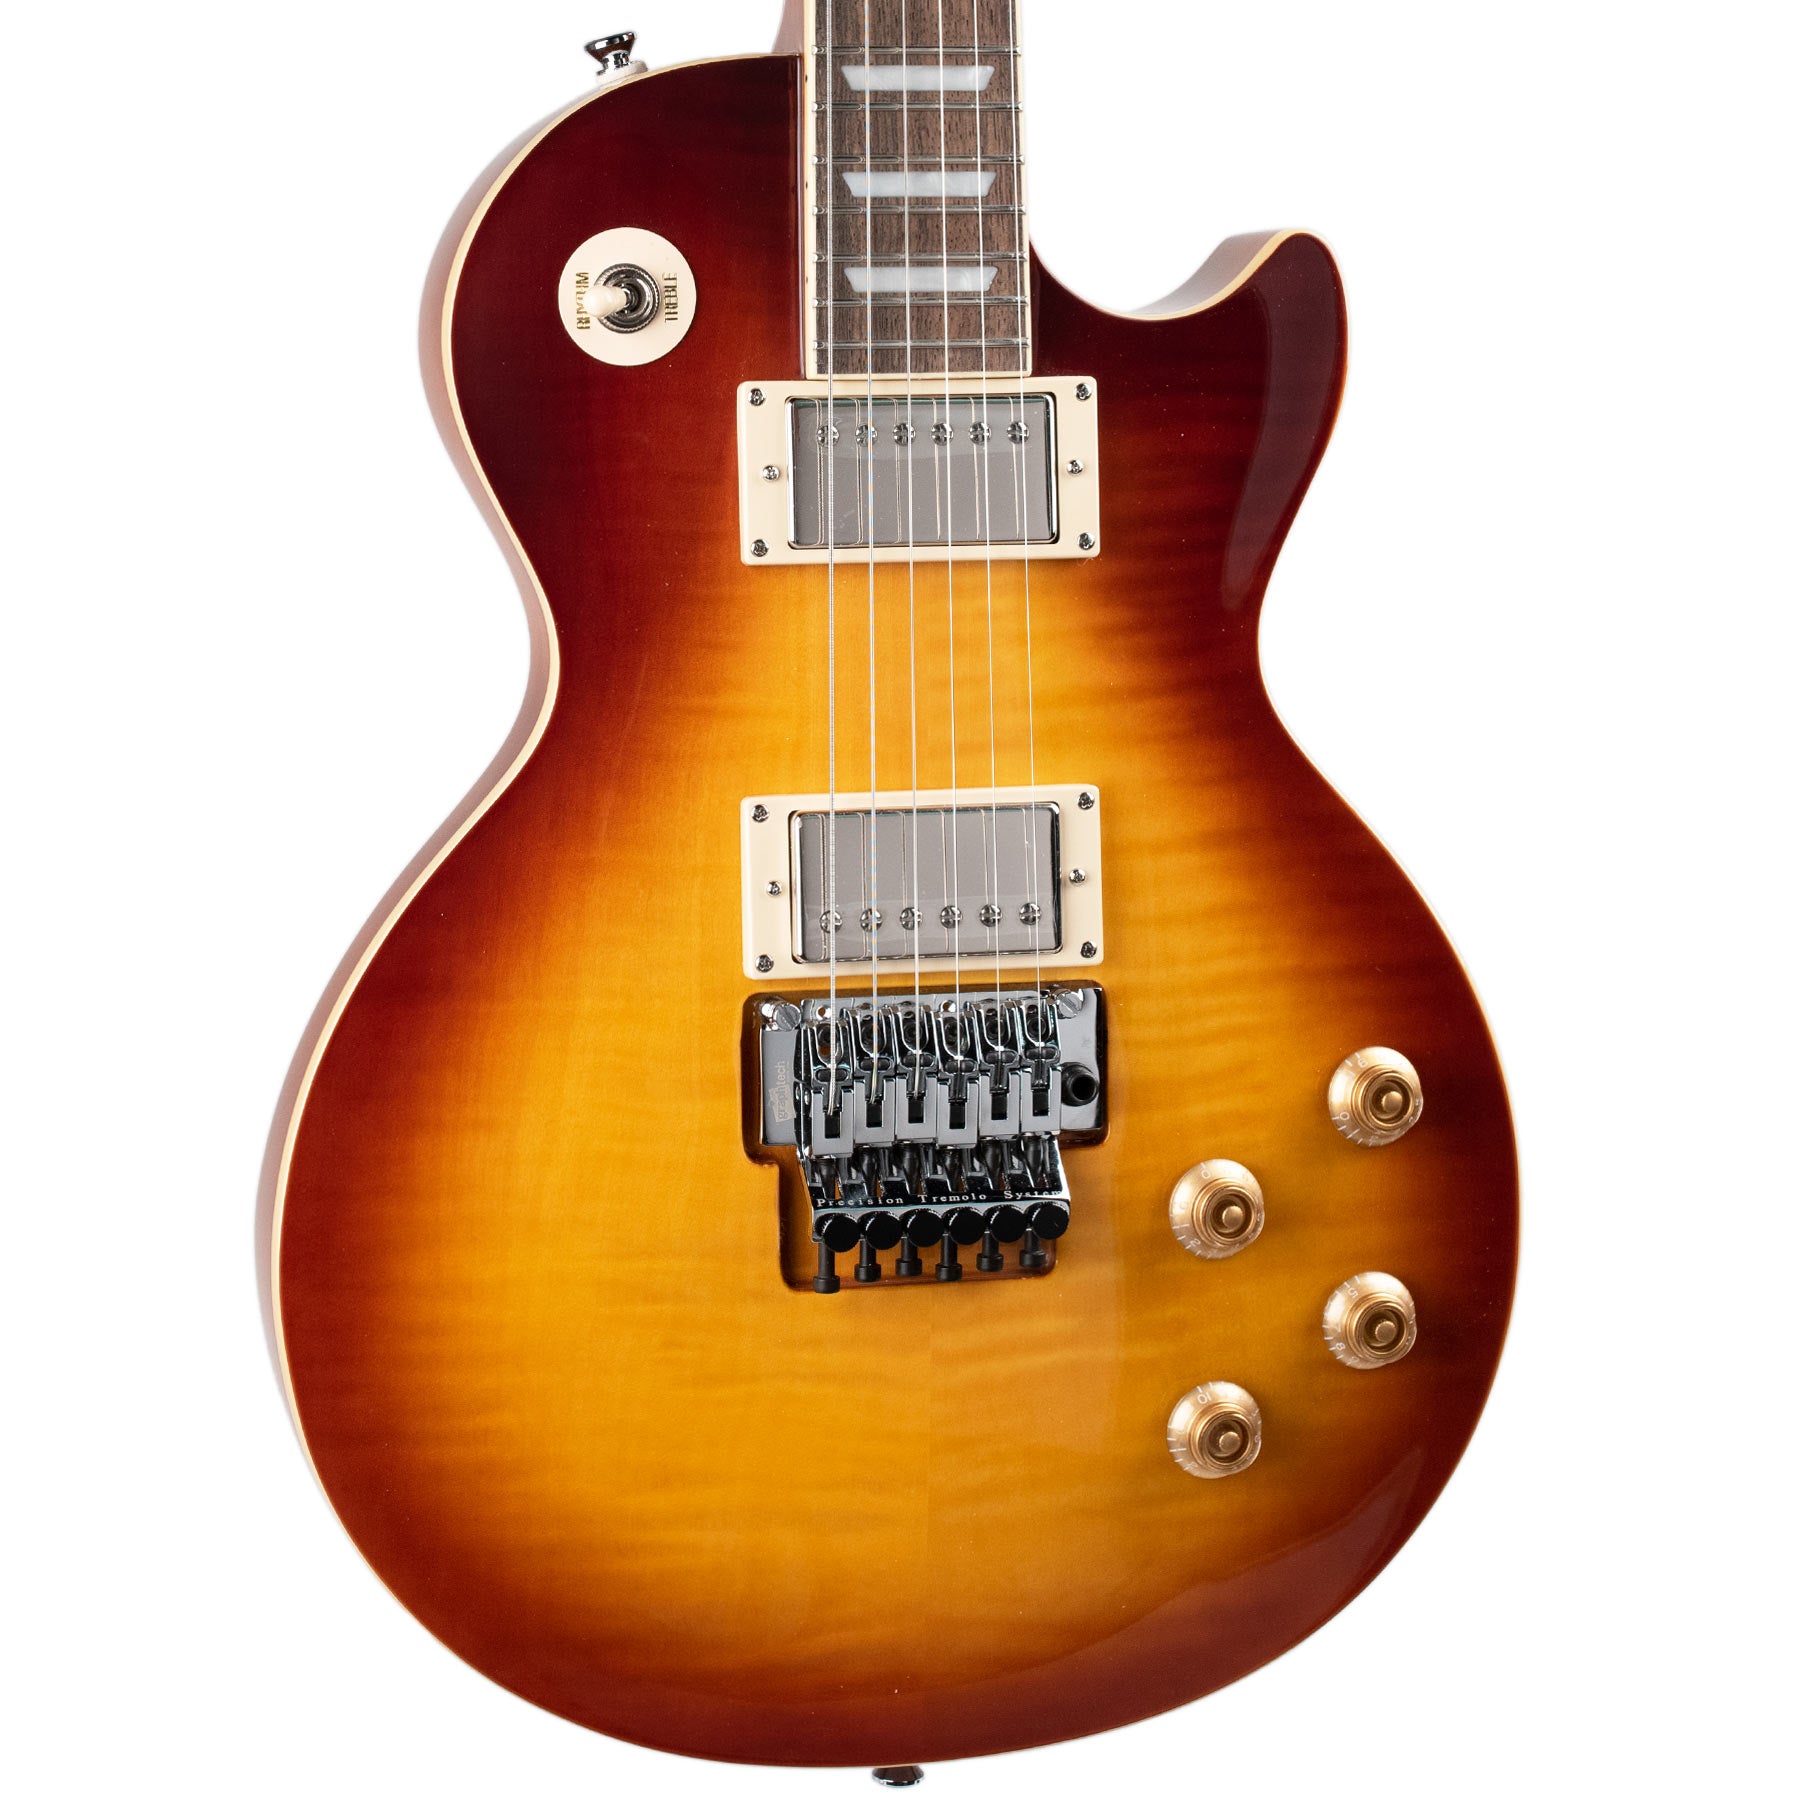 EPIPHONE ALEX LIFESON SIGNATURE LES PAUL AXCESS OUTFIT - VICEROY BROWN